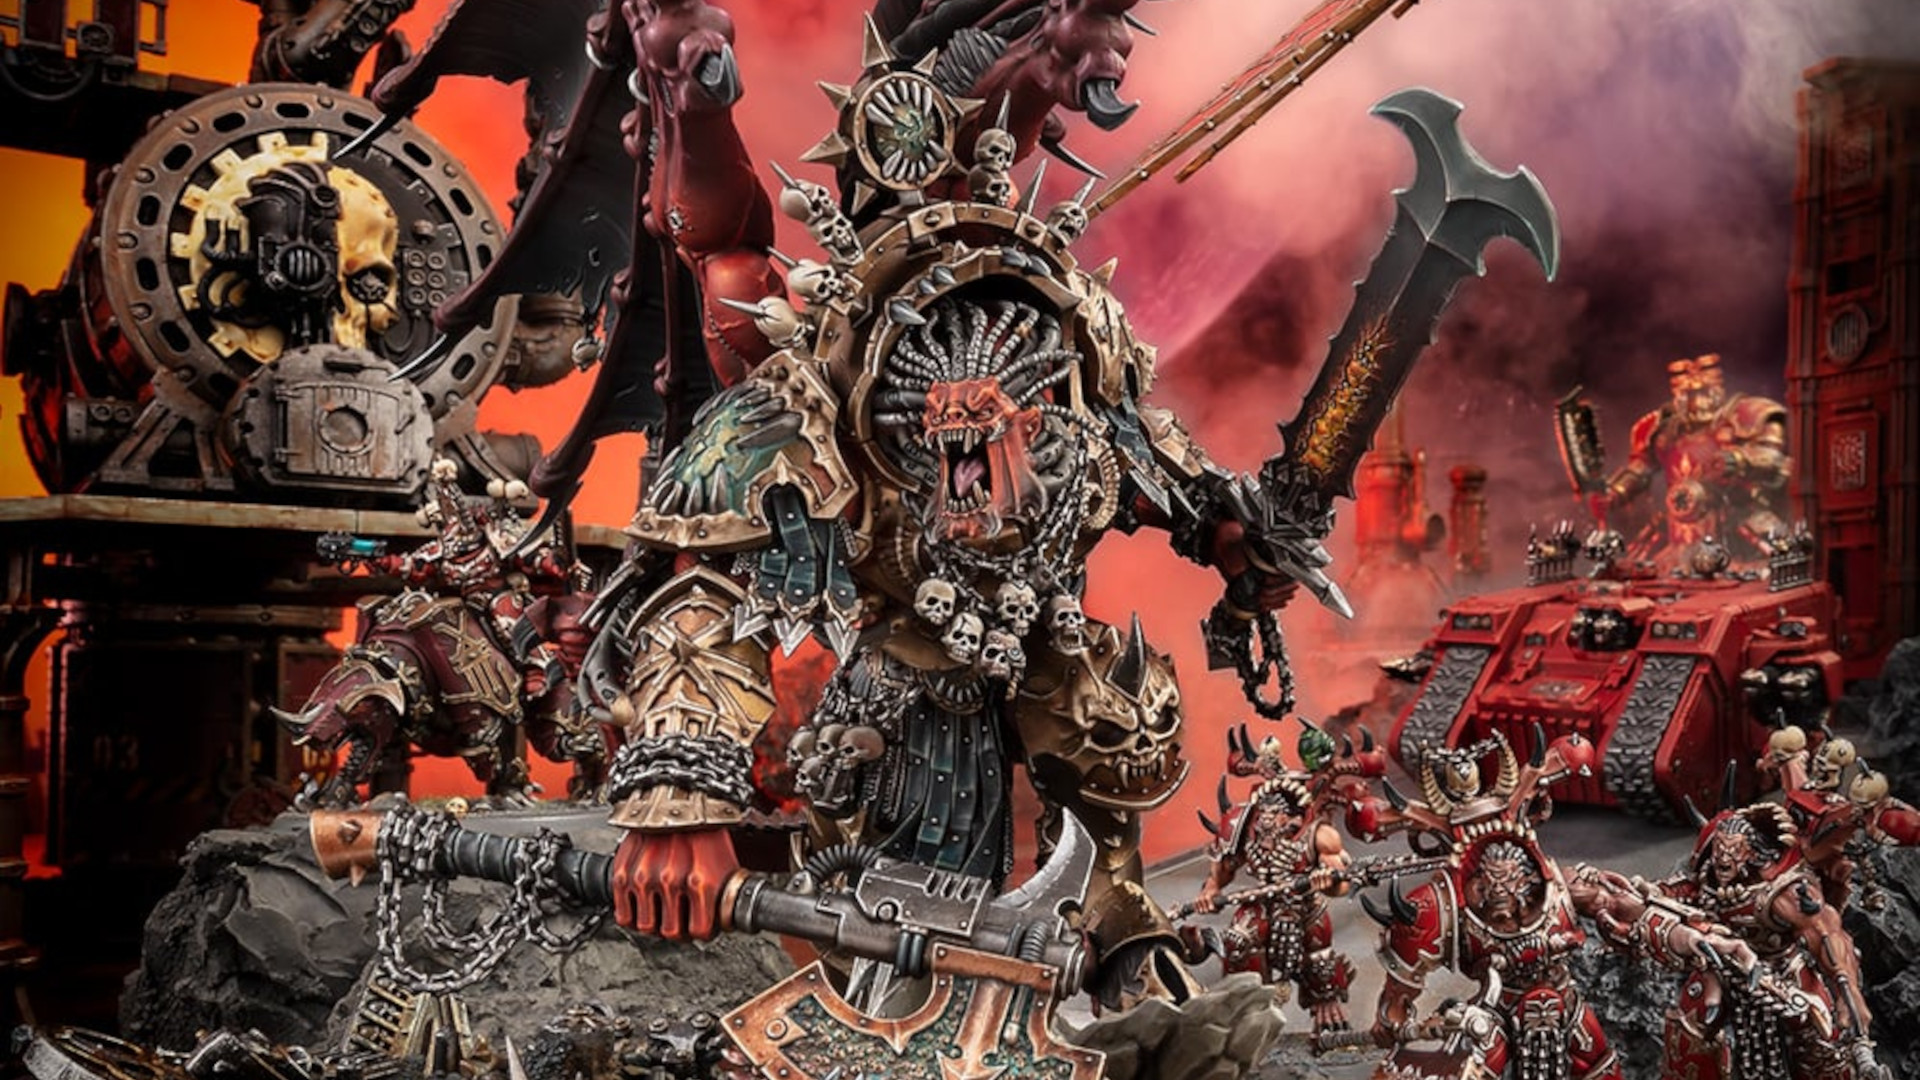 Because Of Dragons: Should Warhammer: The Old World Go Back Even Further?